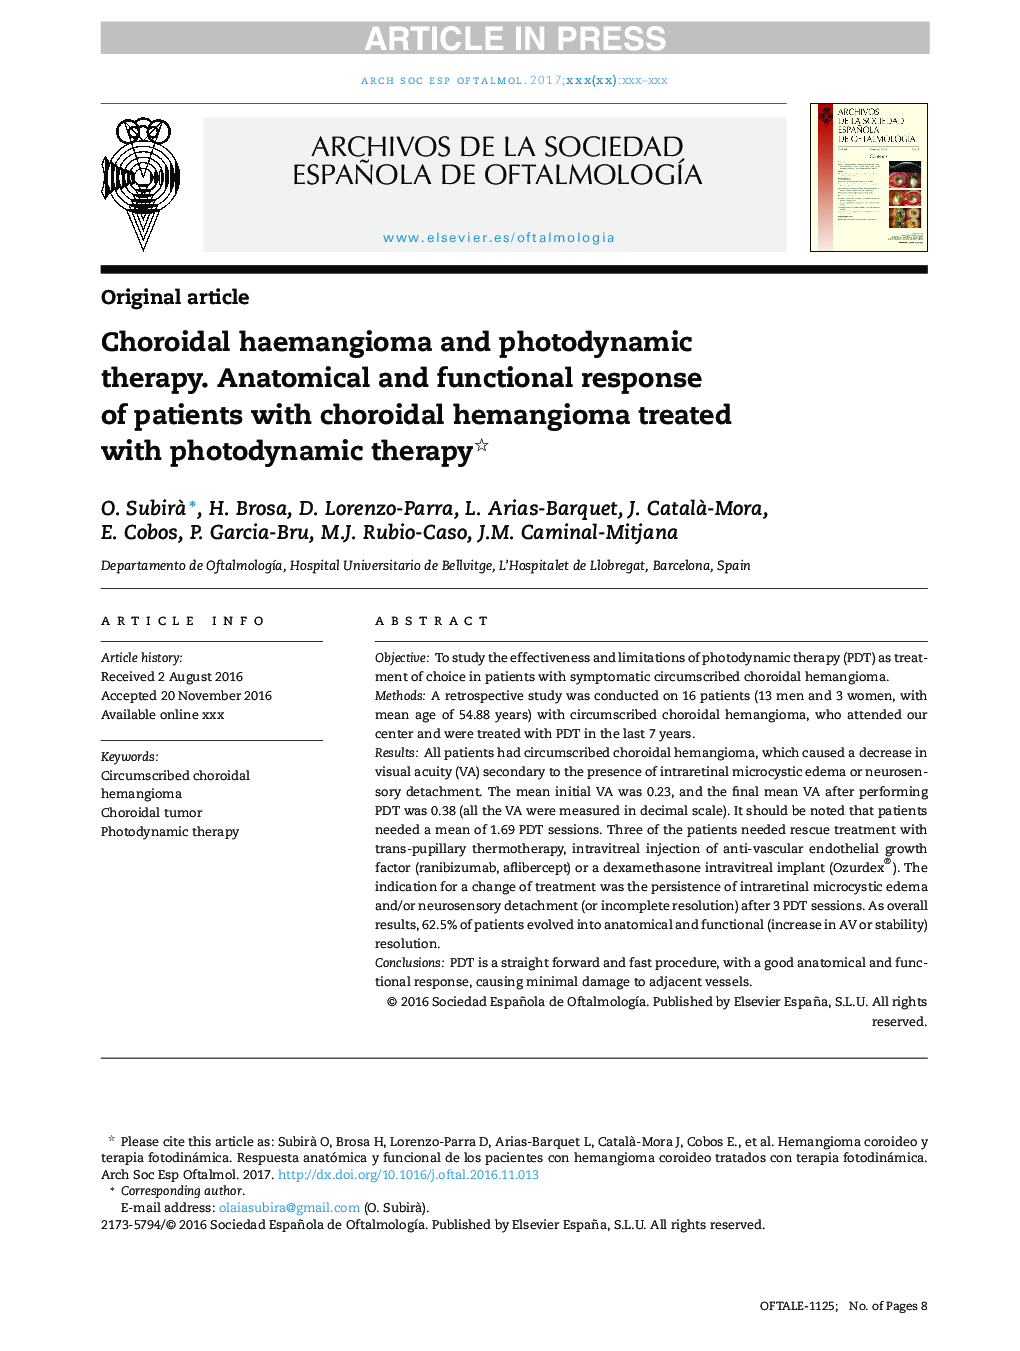 Choroidal haemangioma and photodynamic therapy. Anatomical and functional response of patients with choroidal hemangioma treated with photodynamic therapy